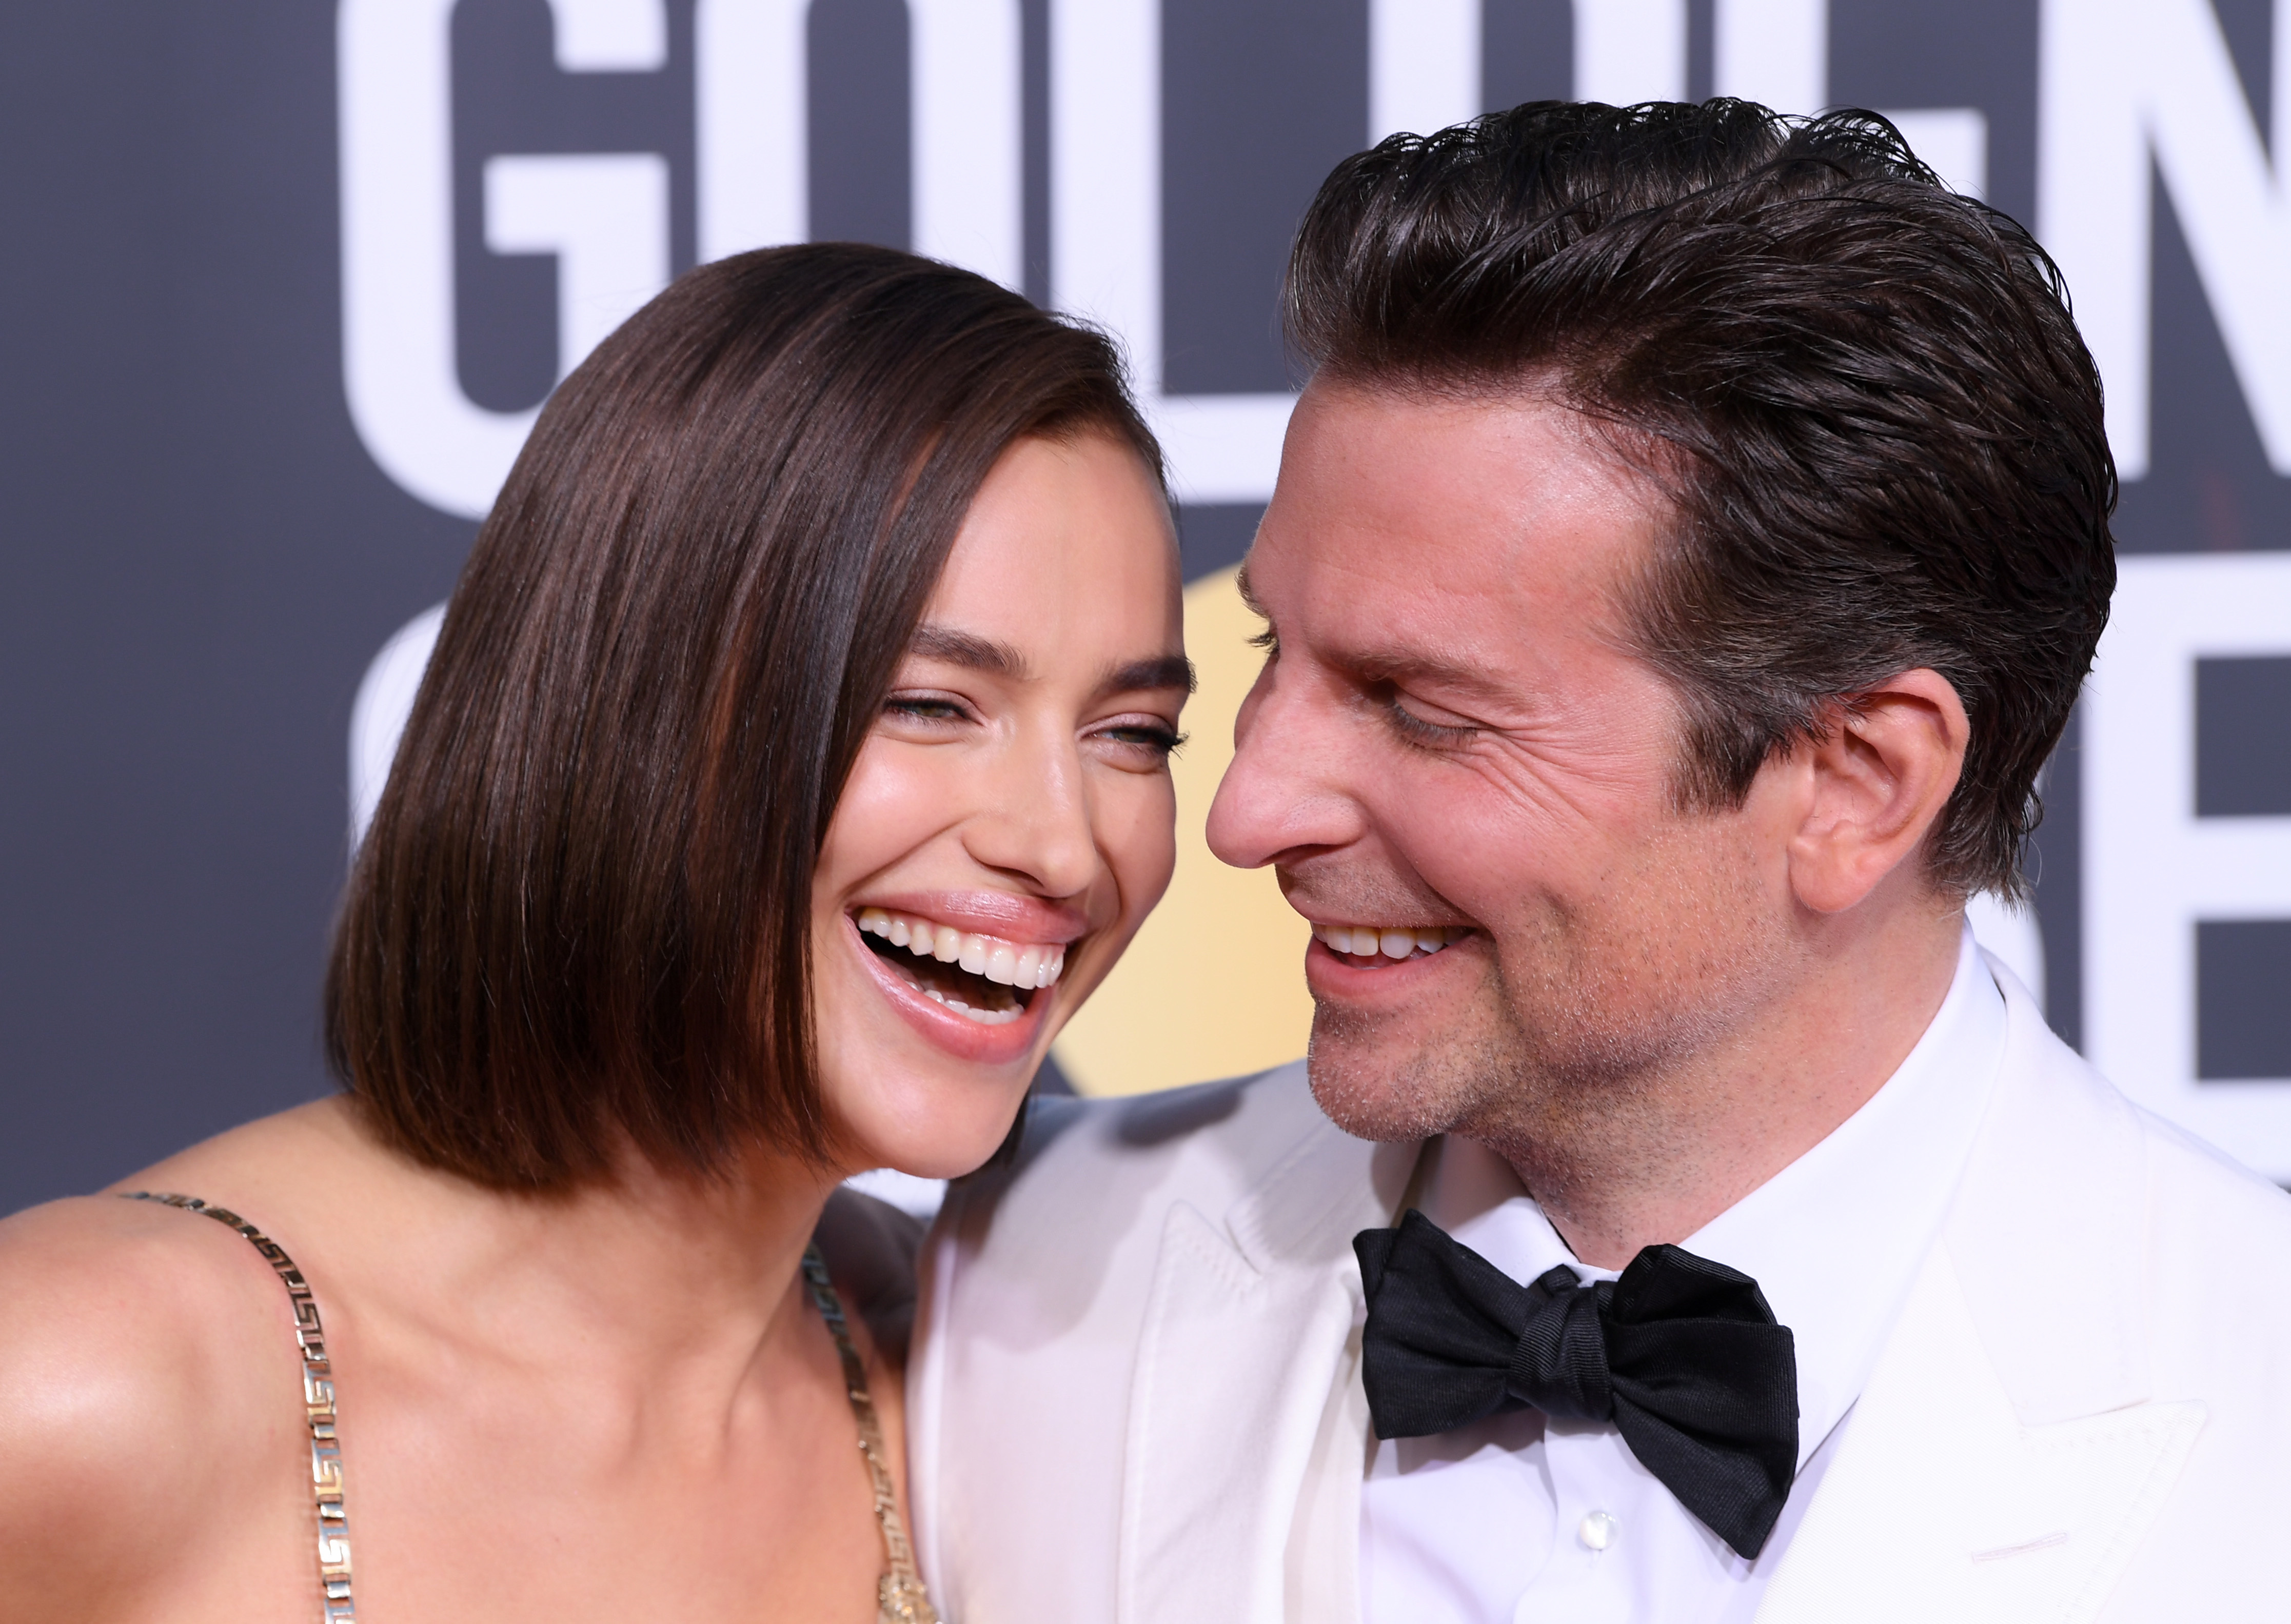 Bradley Cooper and Irina Shayk Take Trip to Italy with Daughter: Source